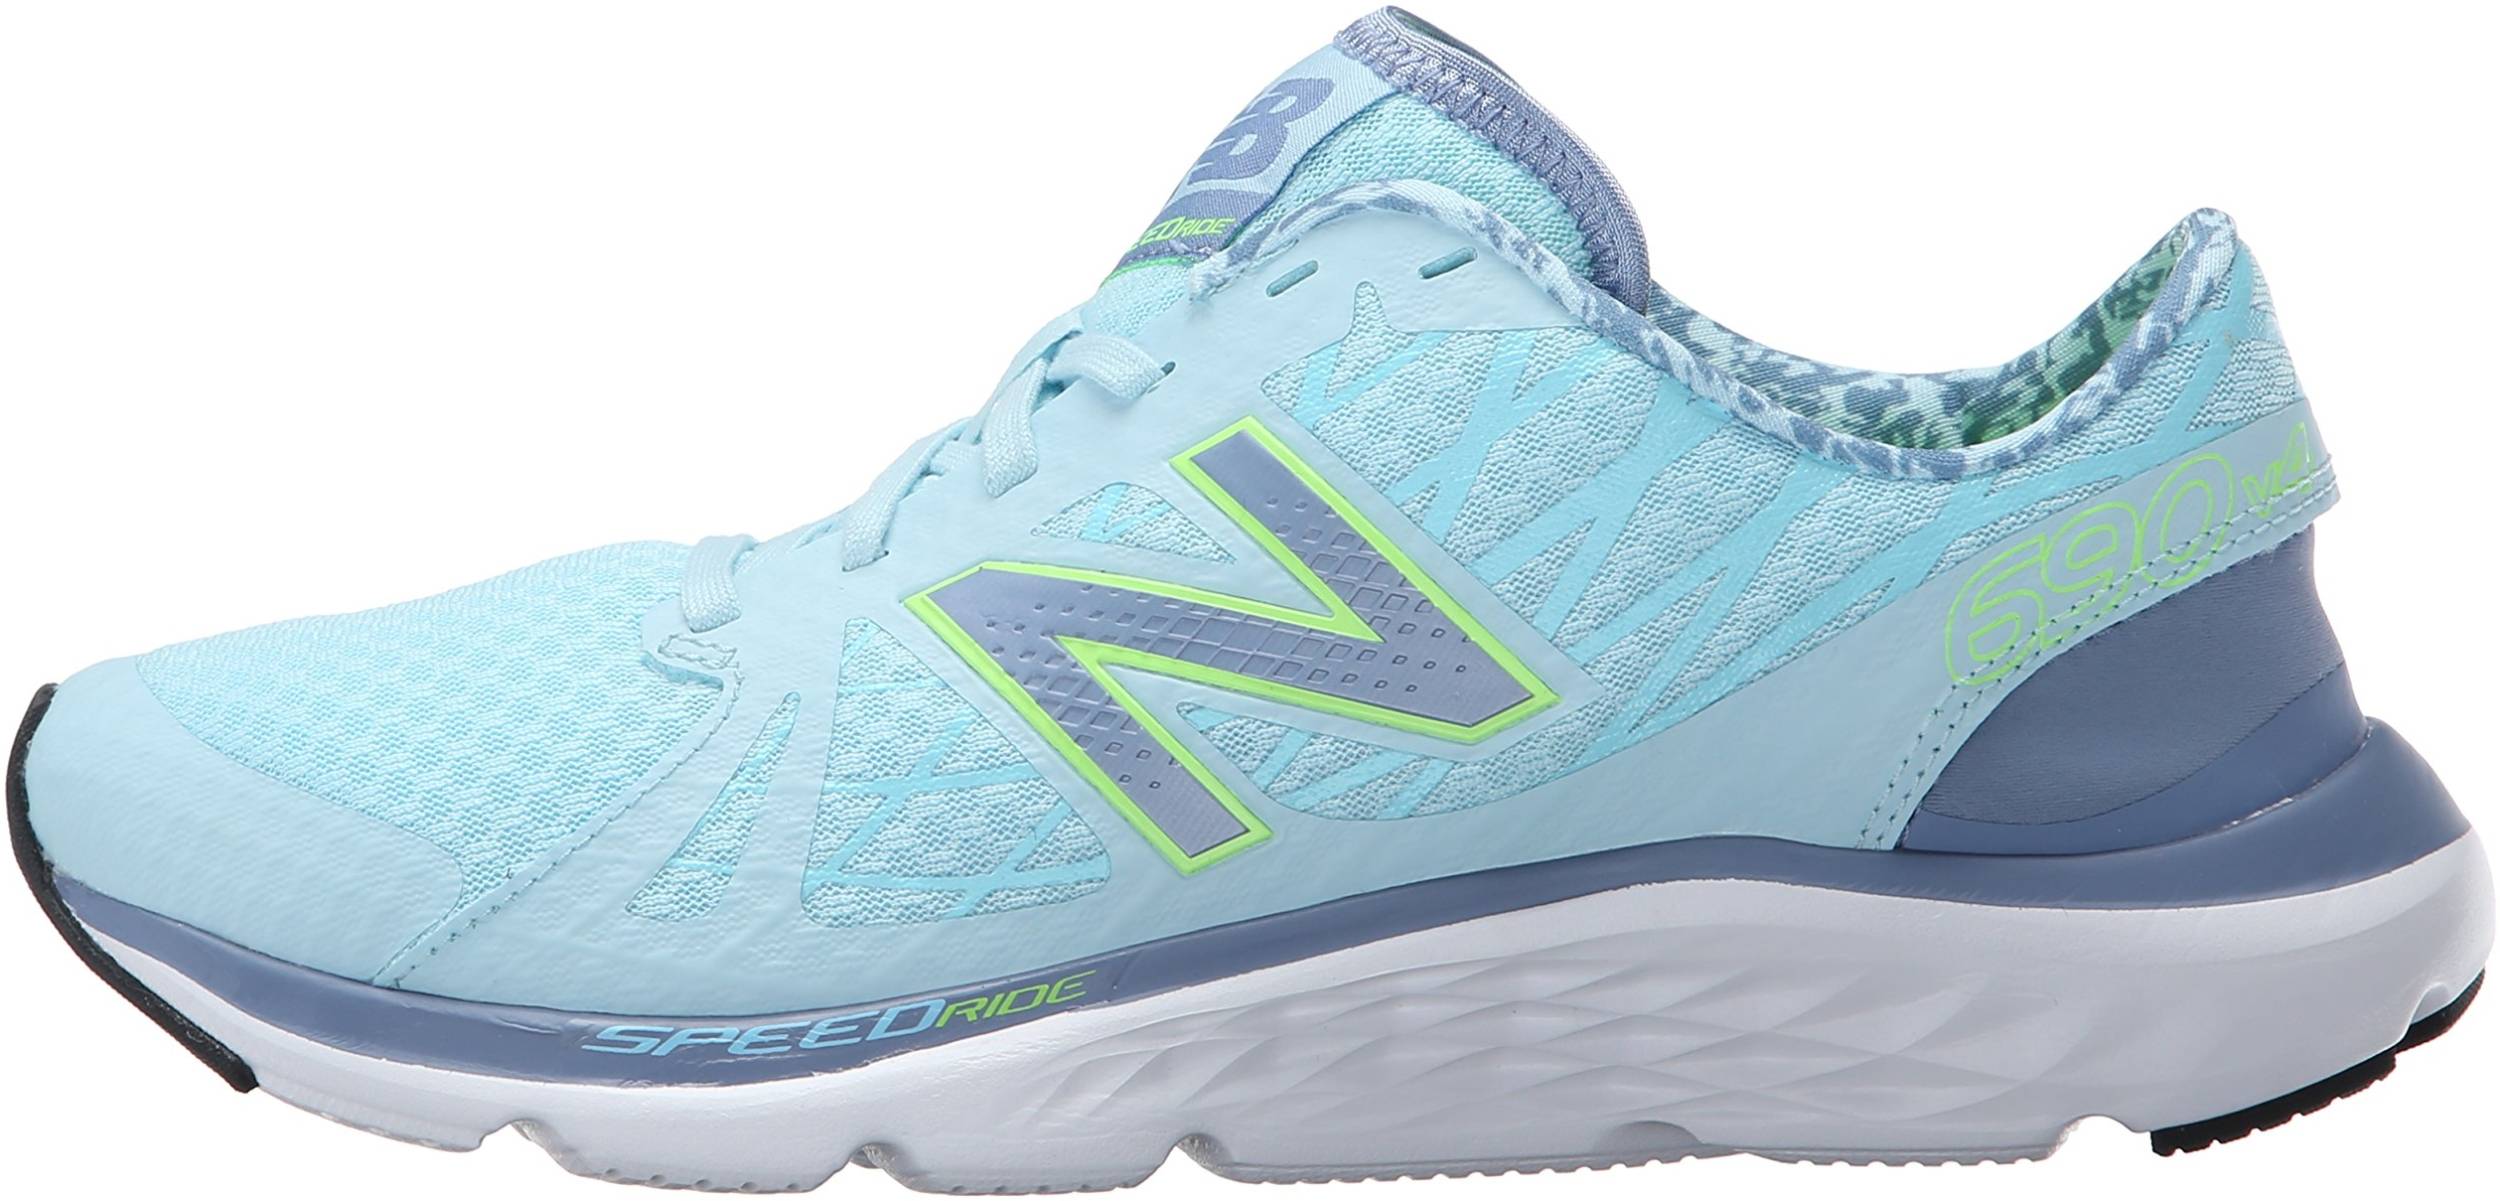 Only $58 + Review of New Balance 690 v4 